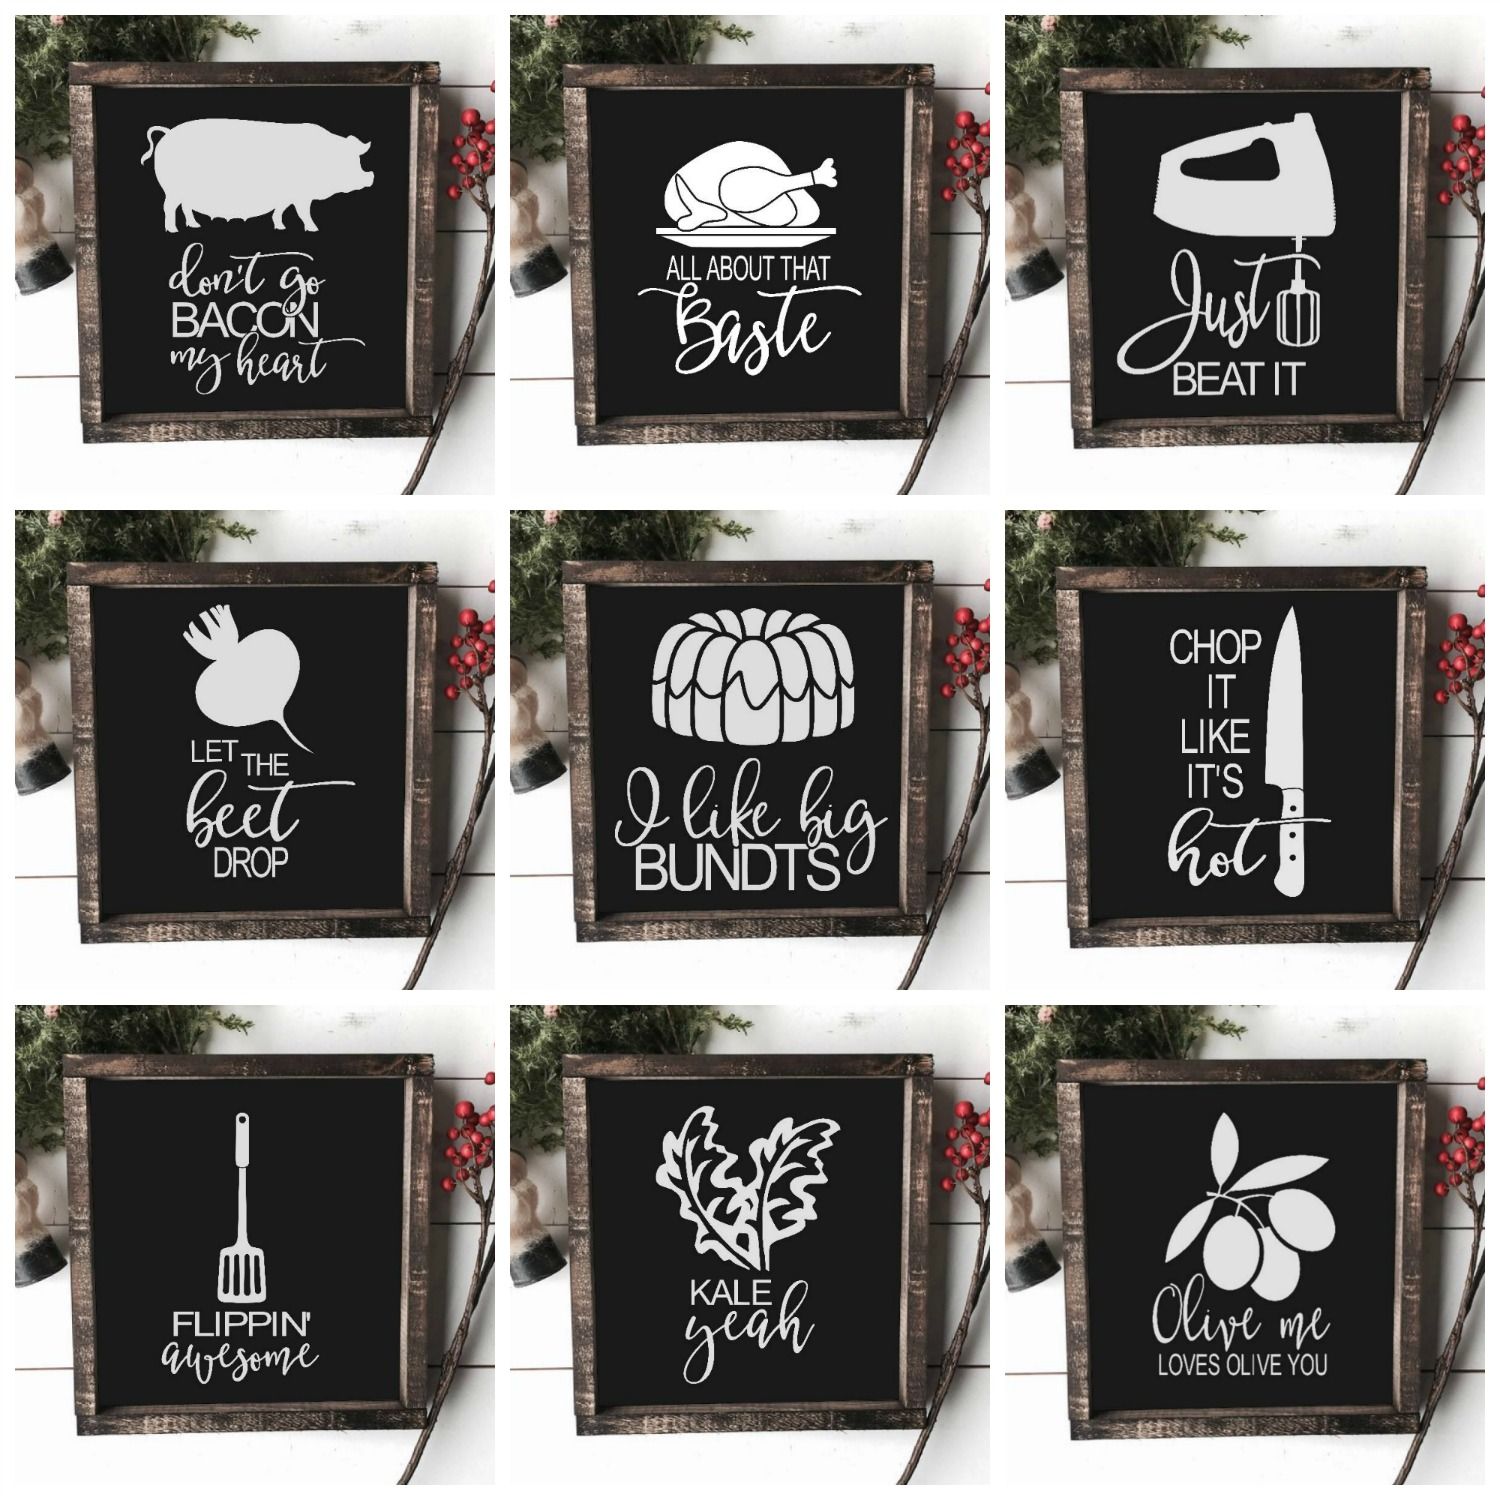 Funny Kitchen Signs Funny Kitchen Quotes Rustic Kitchen 